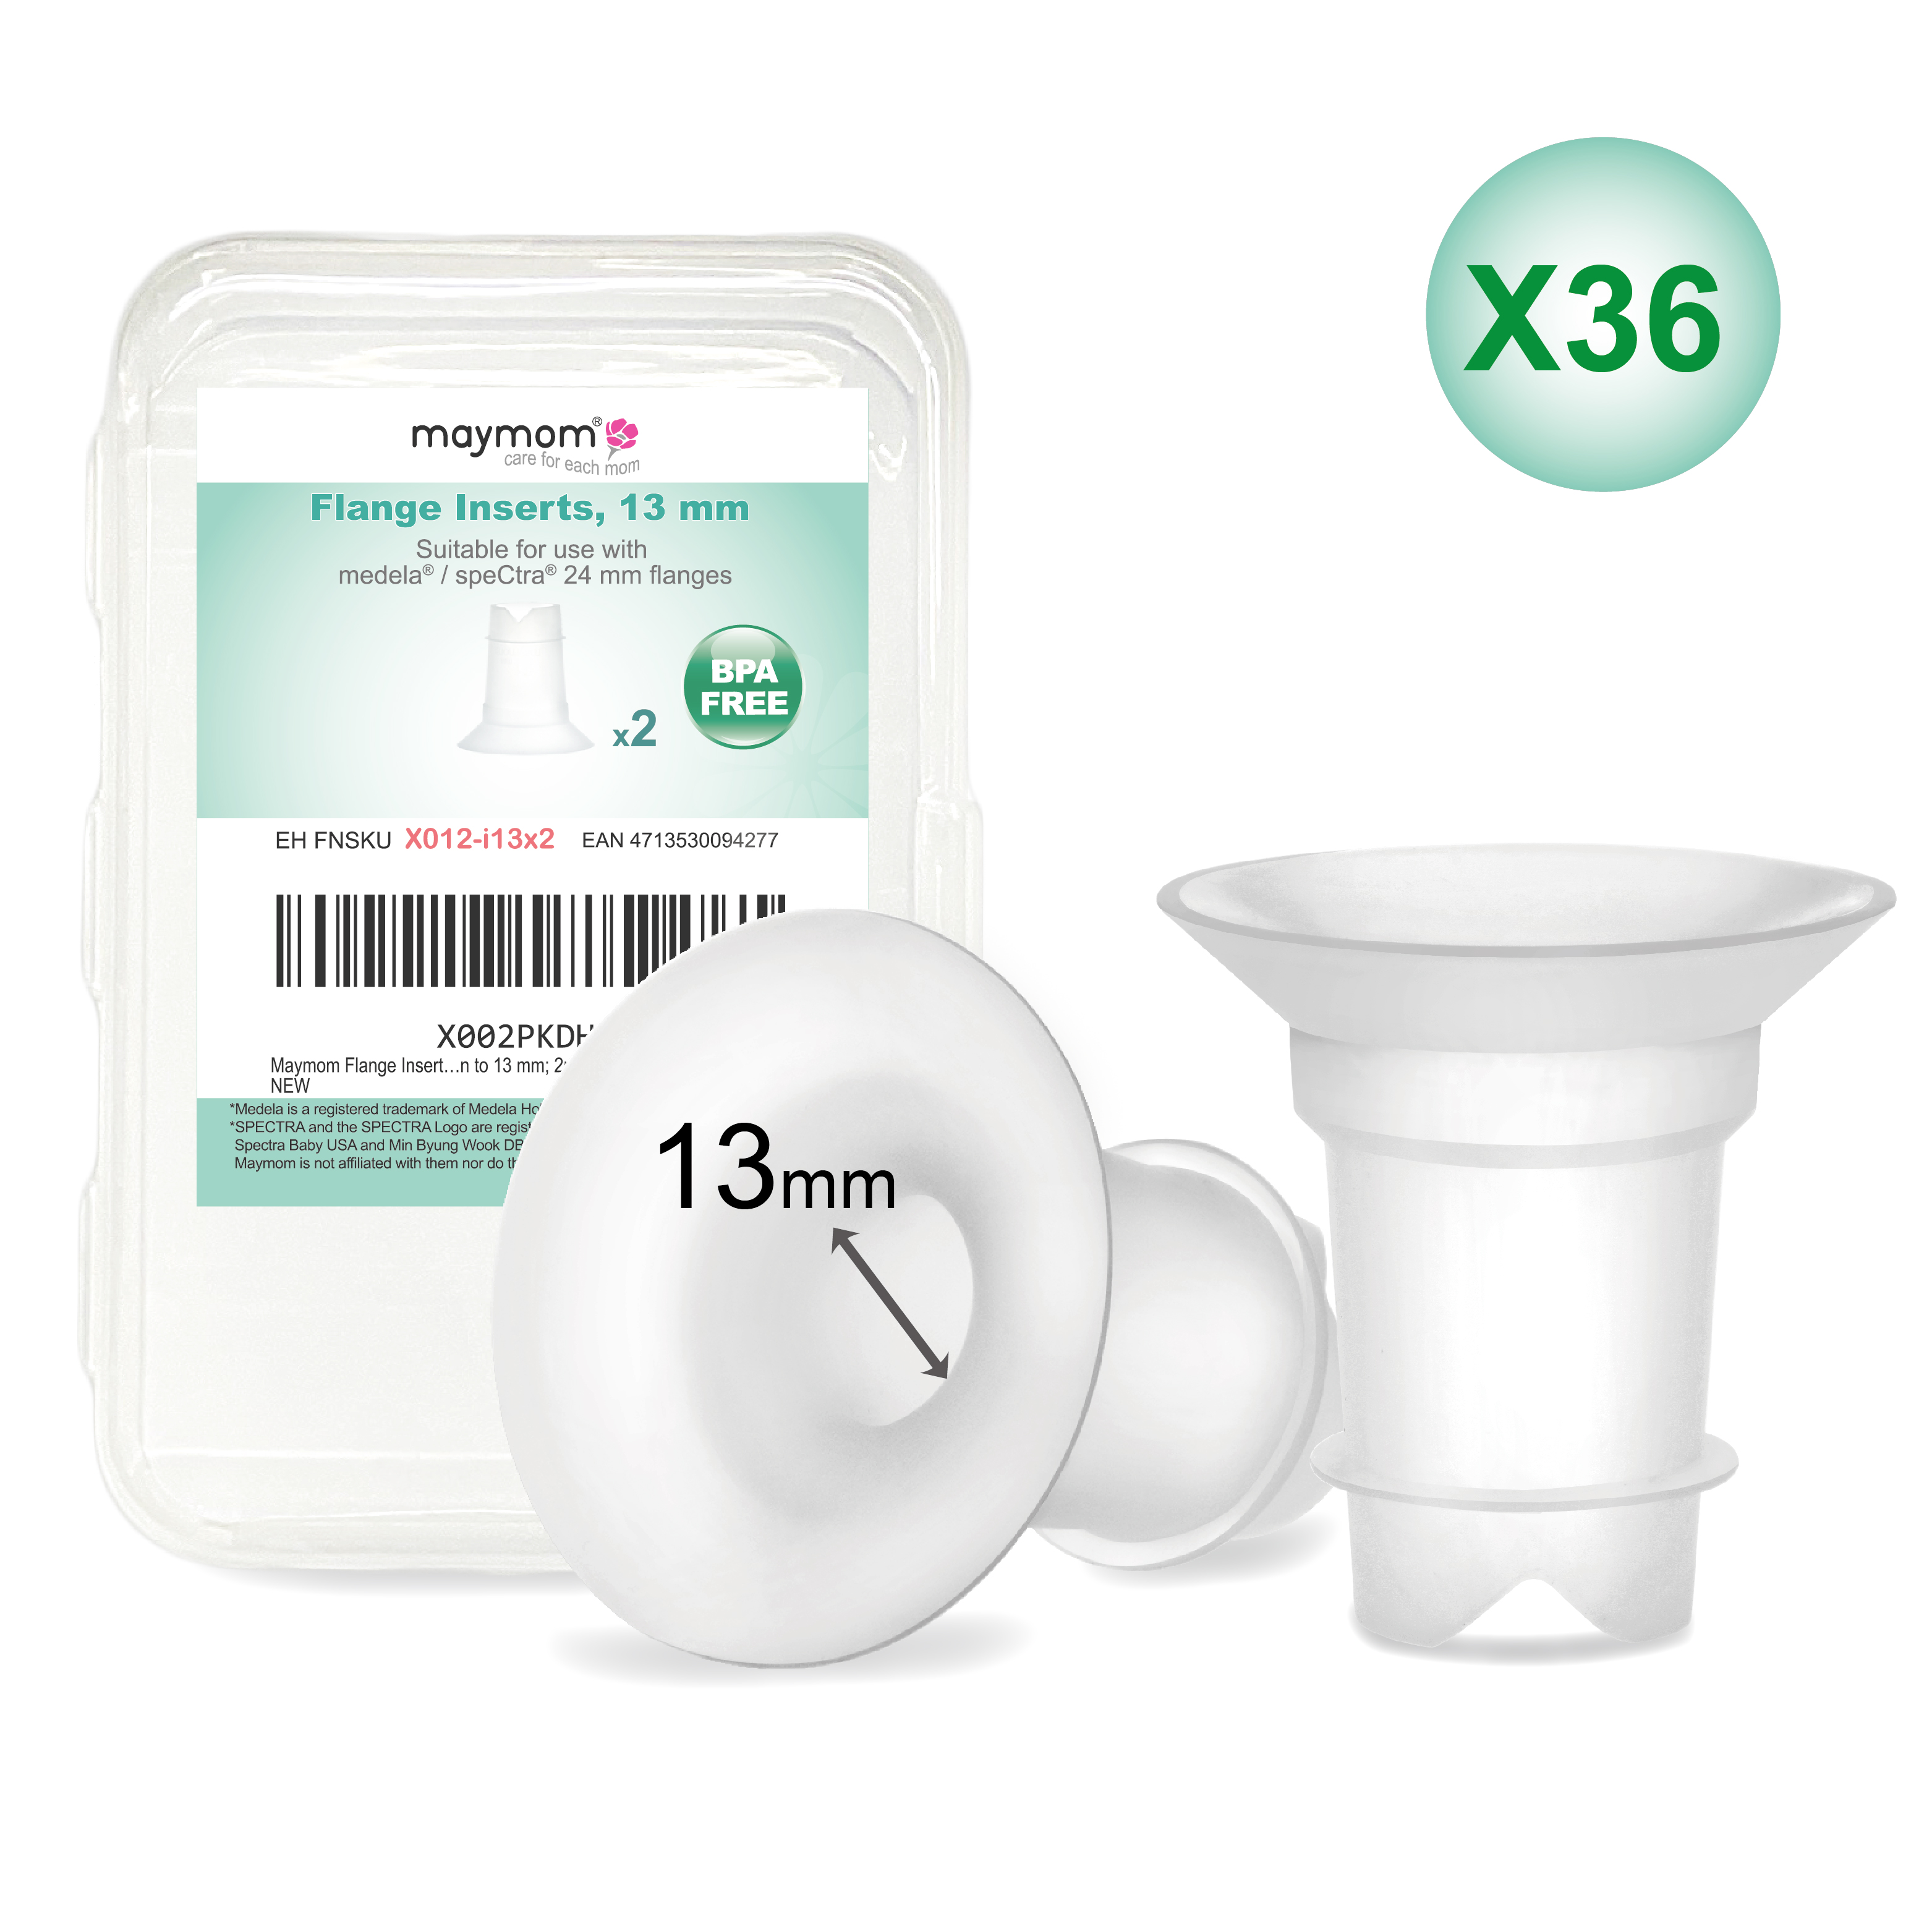 Maymom Flange 13mm Inserts Compatible with Medela, Spectra 24 mm Shields/Flanges, Momcozy/Willow Wearable Cup.